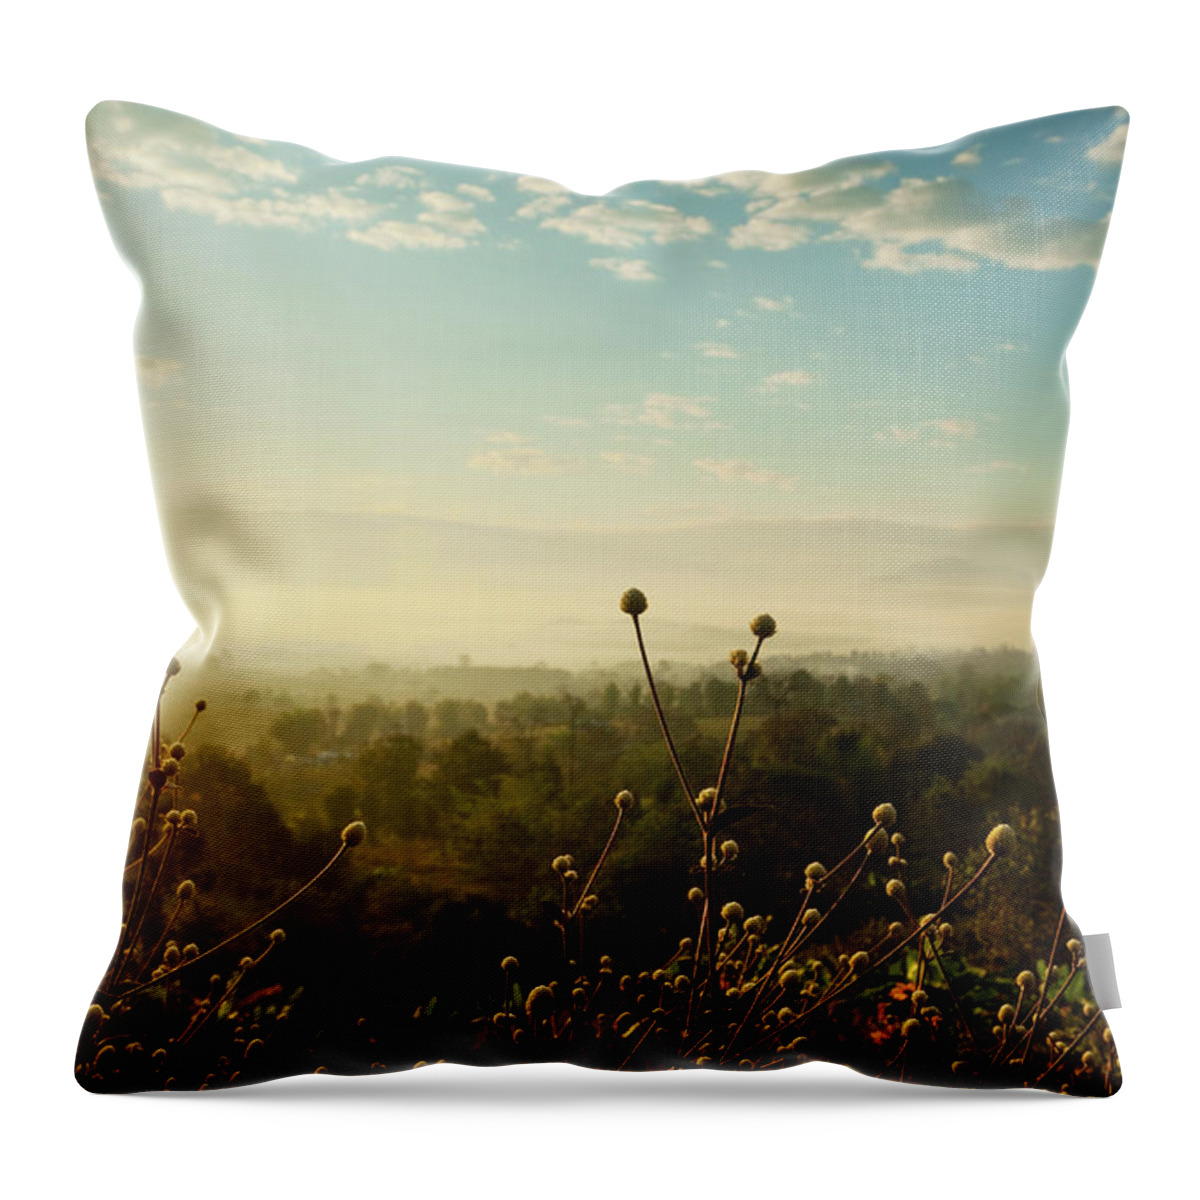 Southeast Asia Throw Pillow featuring the photograph Early Morning In The North Of Thailand by Sndrk